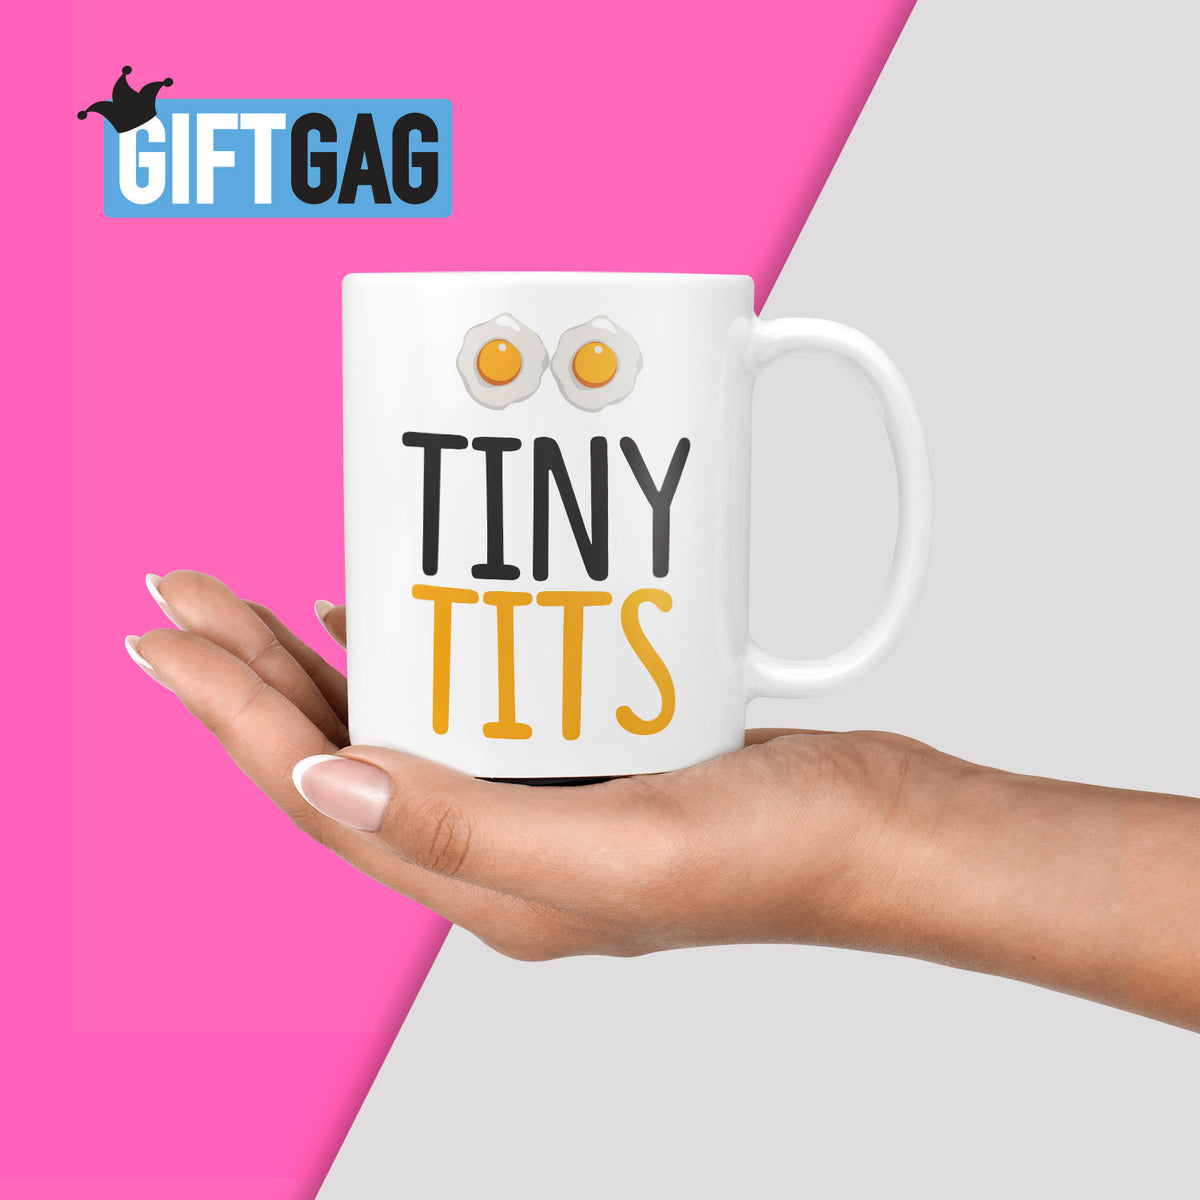 Yeh! New Breasts! - Funny & Rude Gift Mug, Cosmetic Breast Surgery